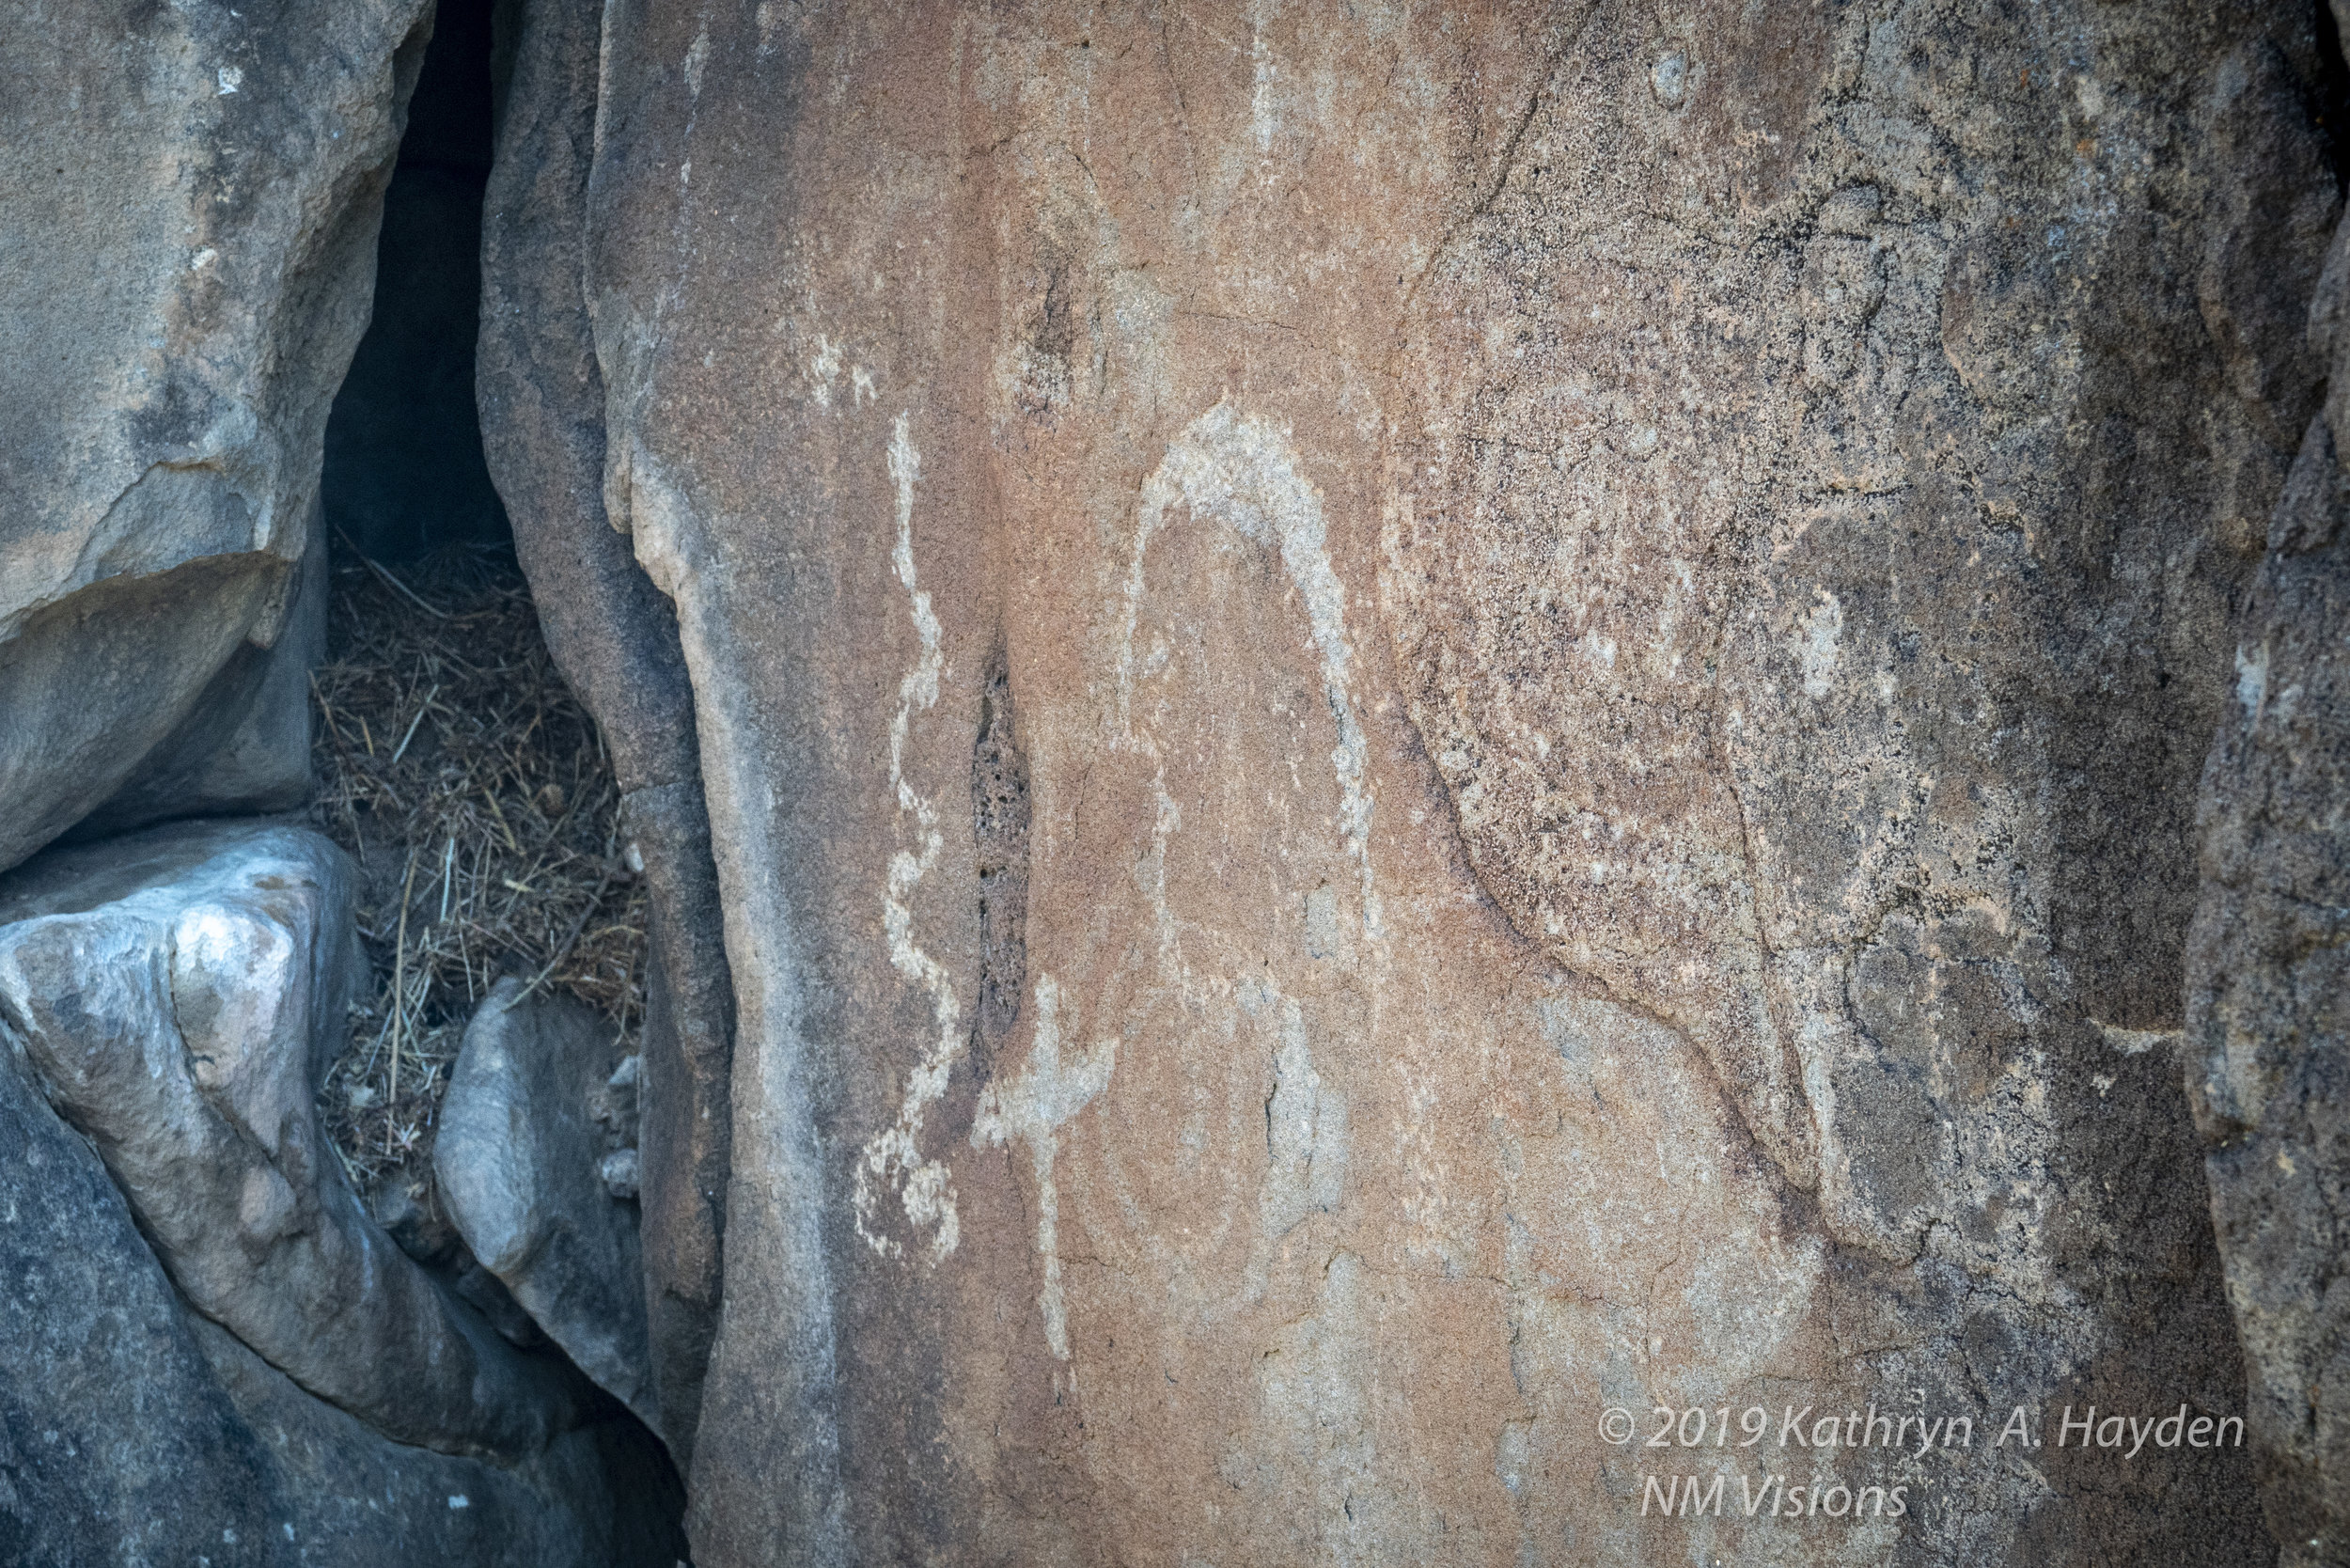  The shepherds would put crosses on some of the rocks with petroglyphs as counter to what they considered pagan art.  And can see the more modern residents have made the crevices their home 